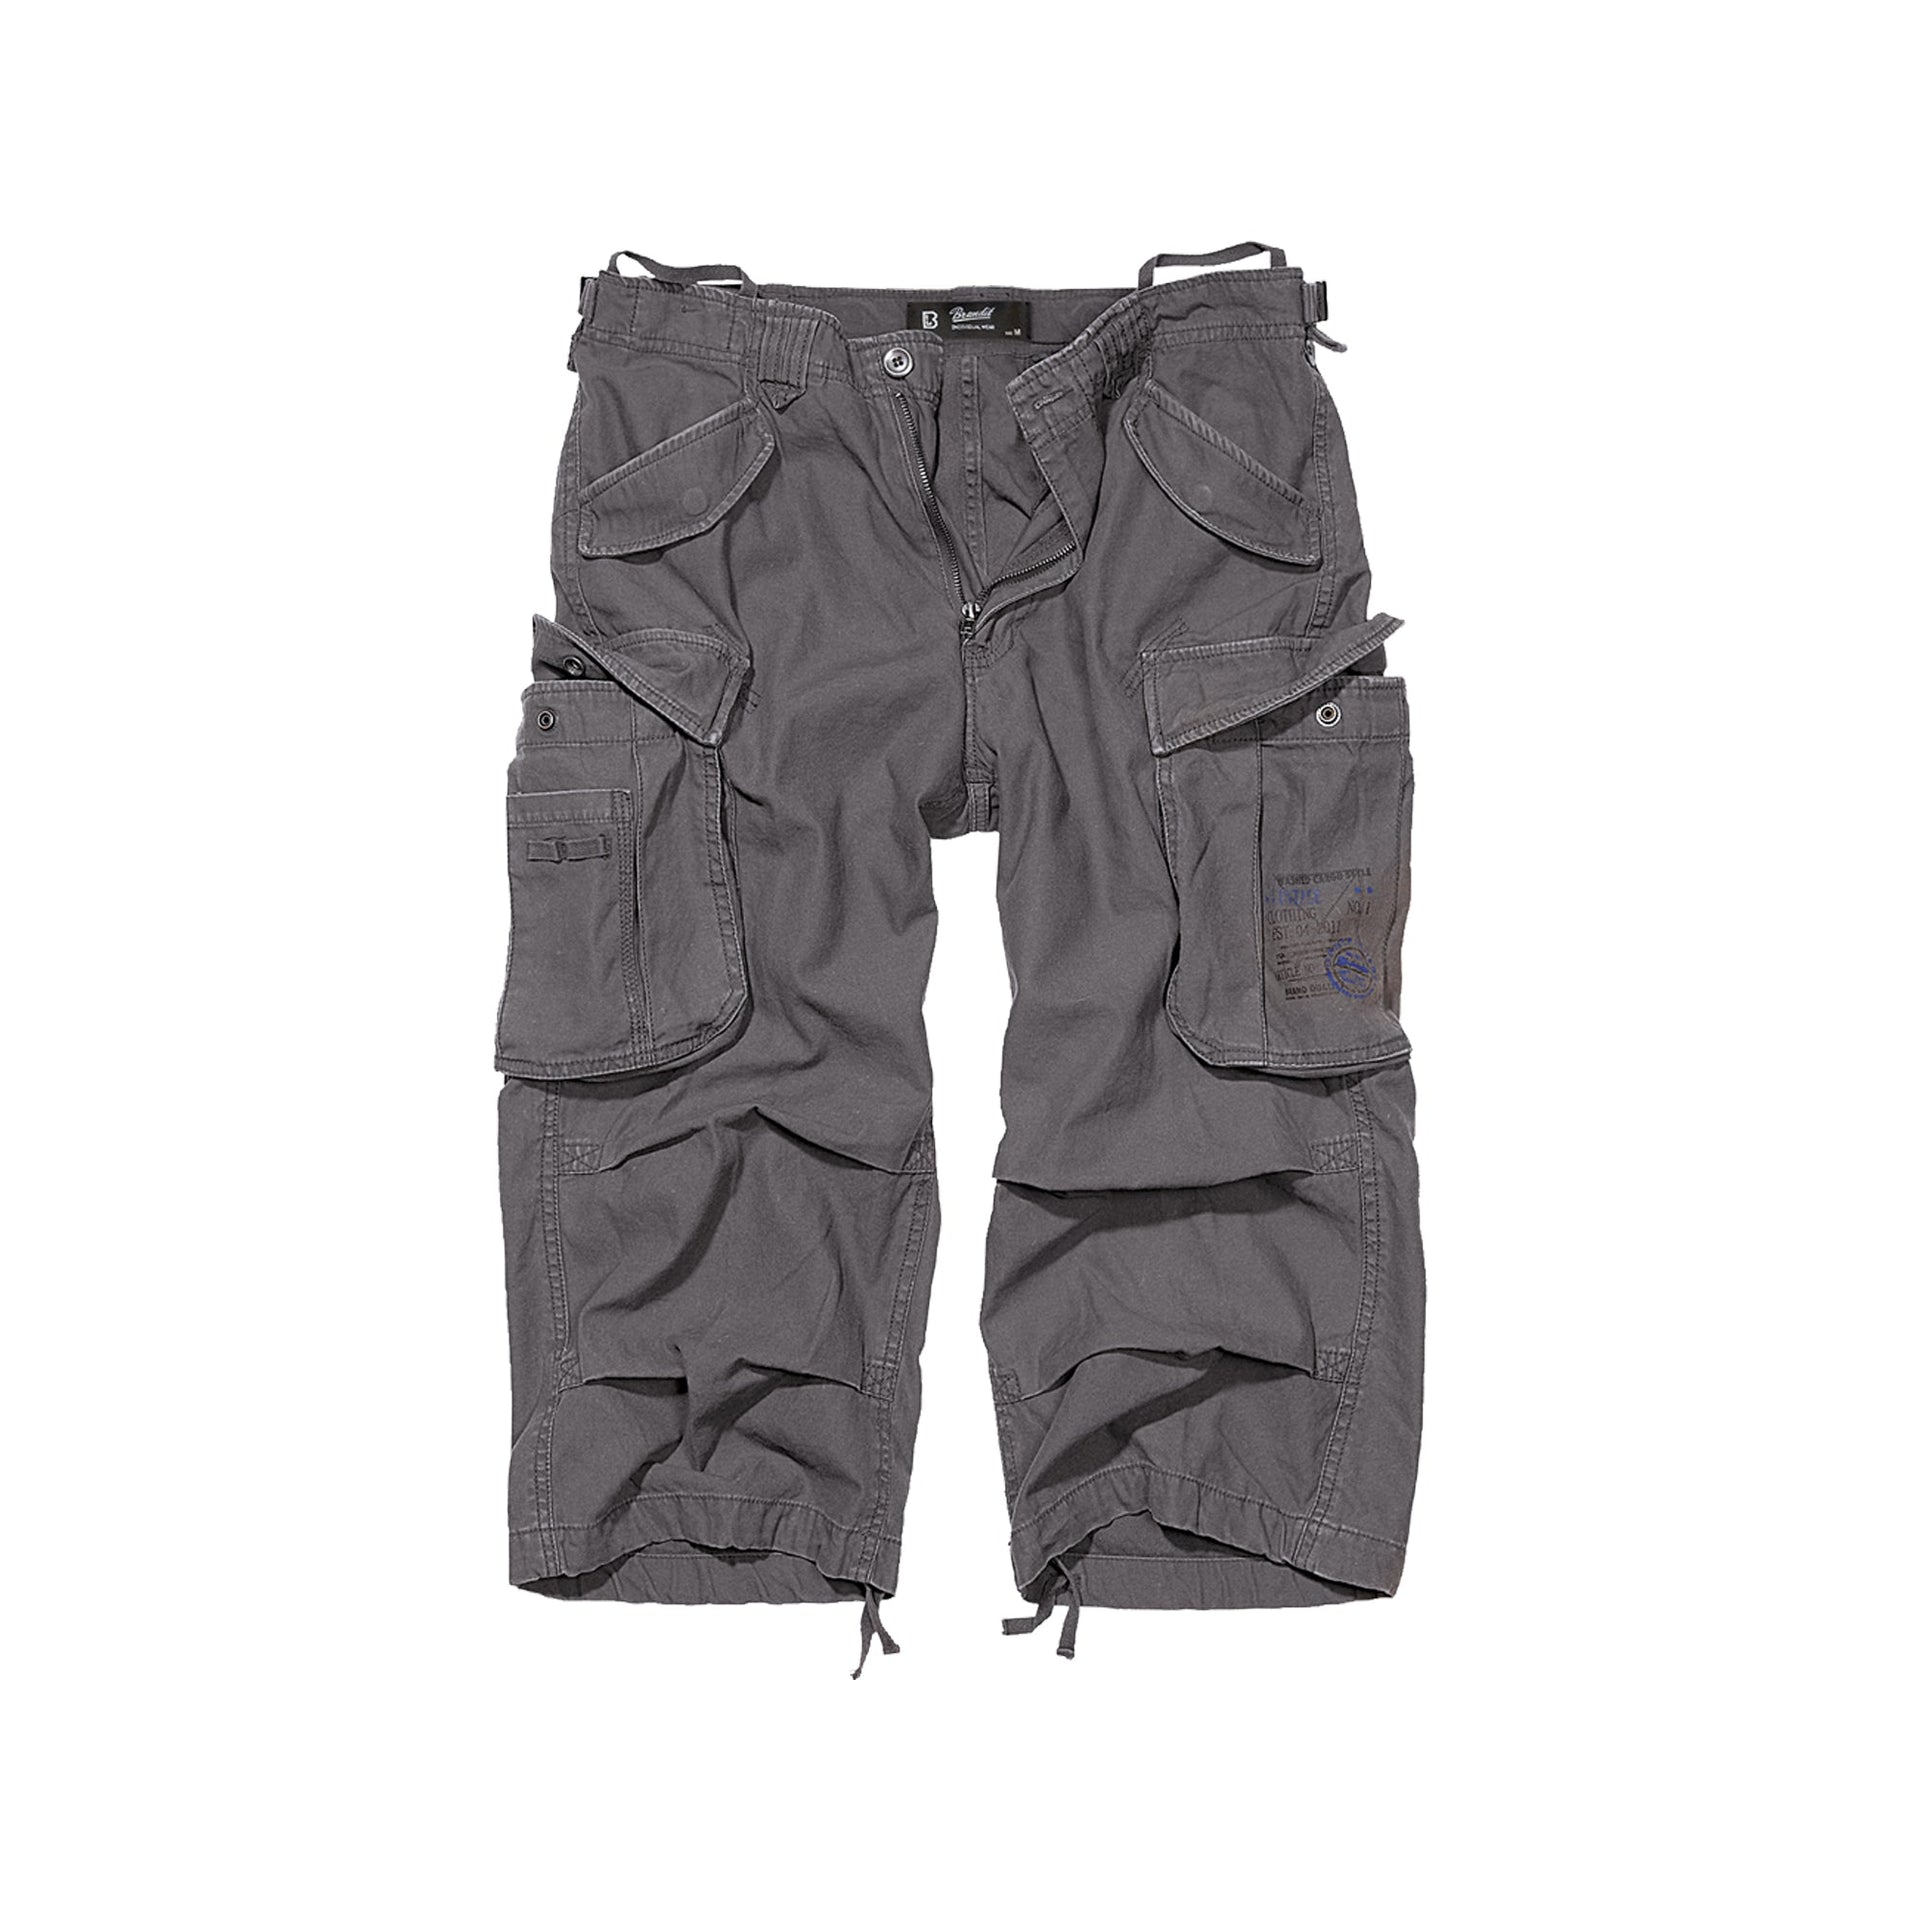 Shorts Industry Vintage 3/4 anthracite